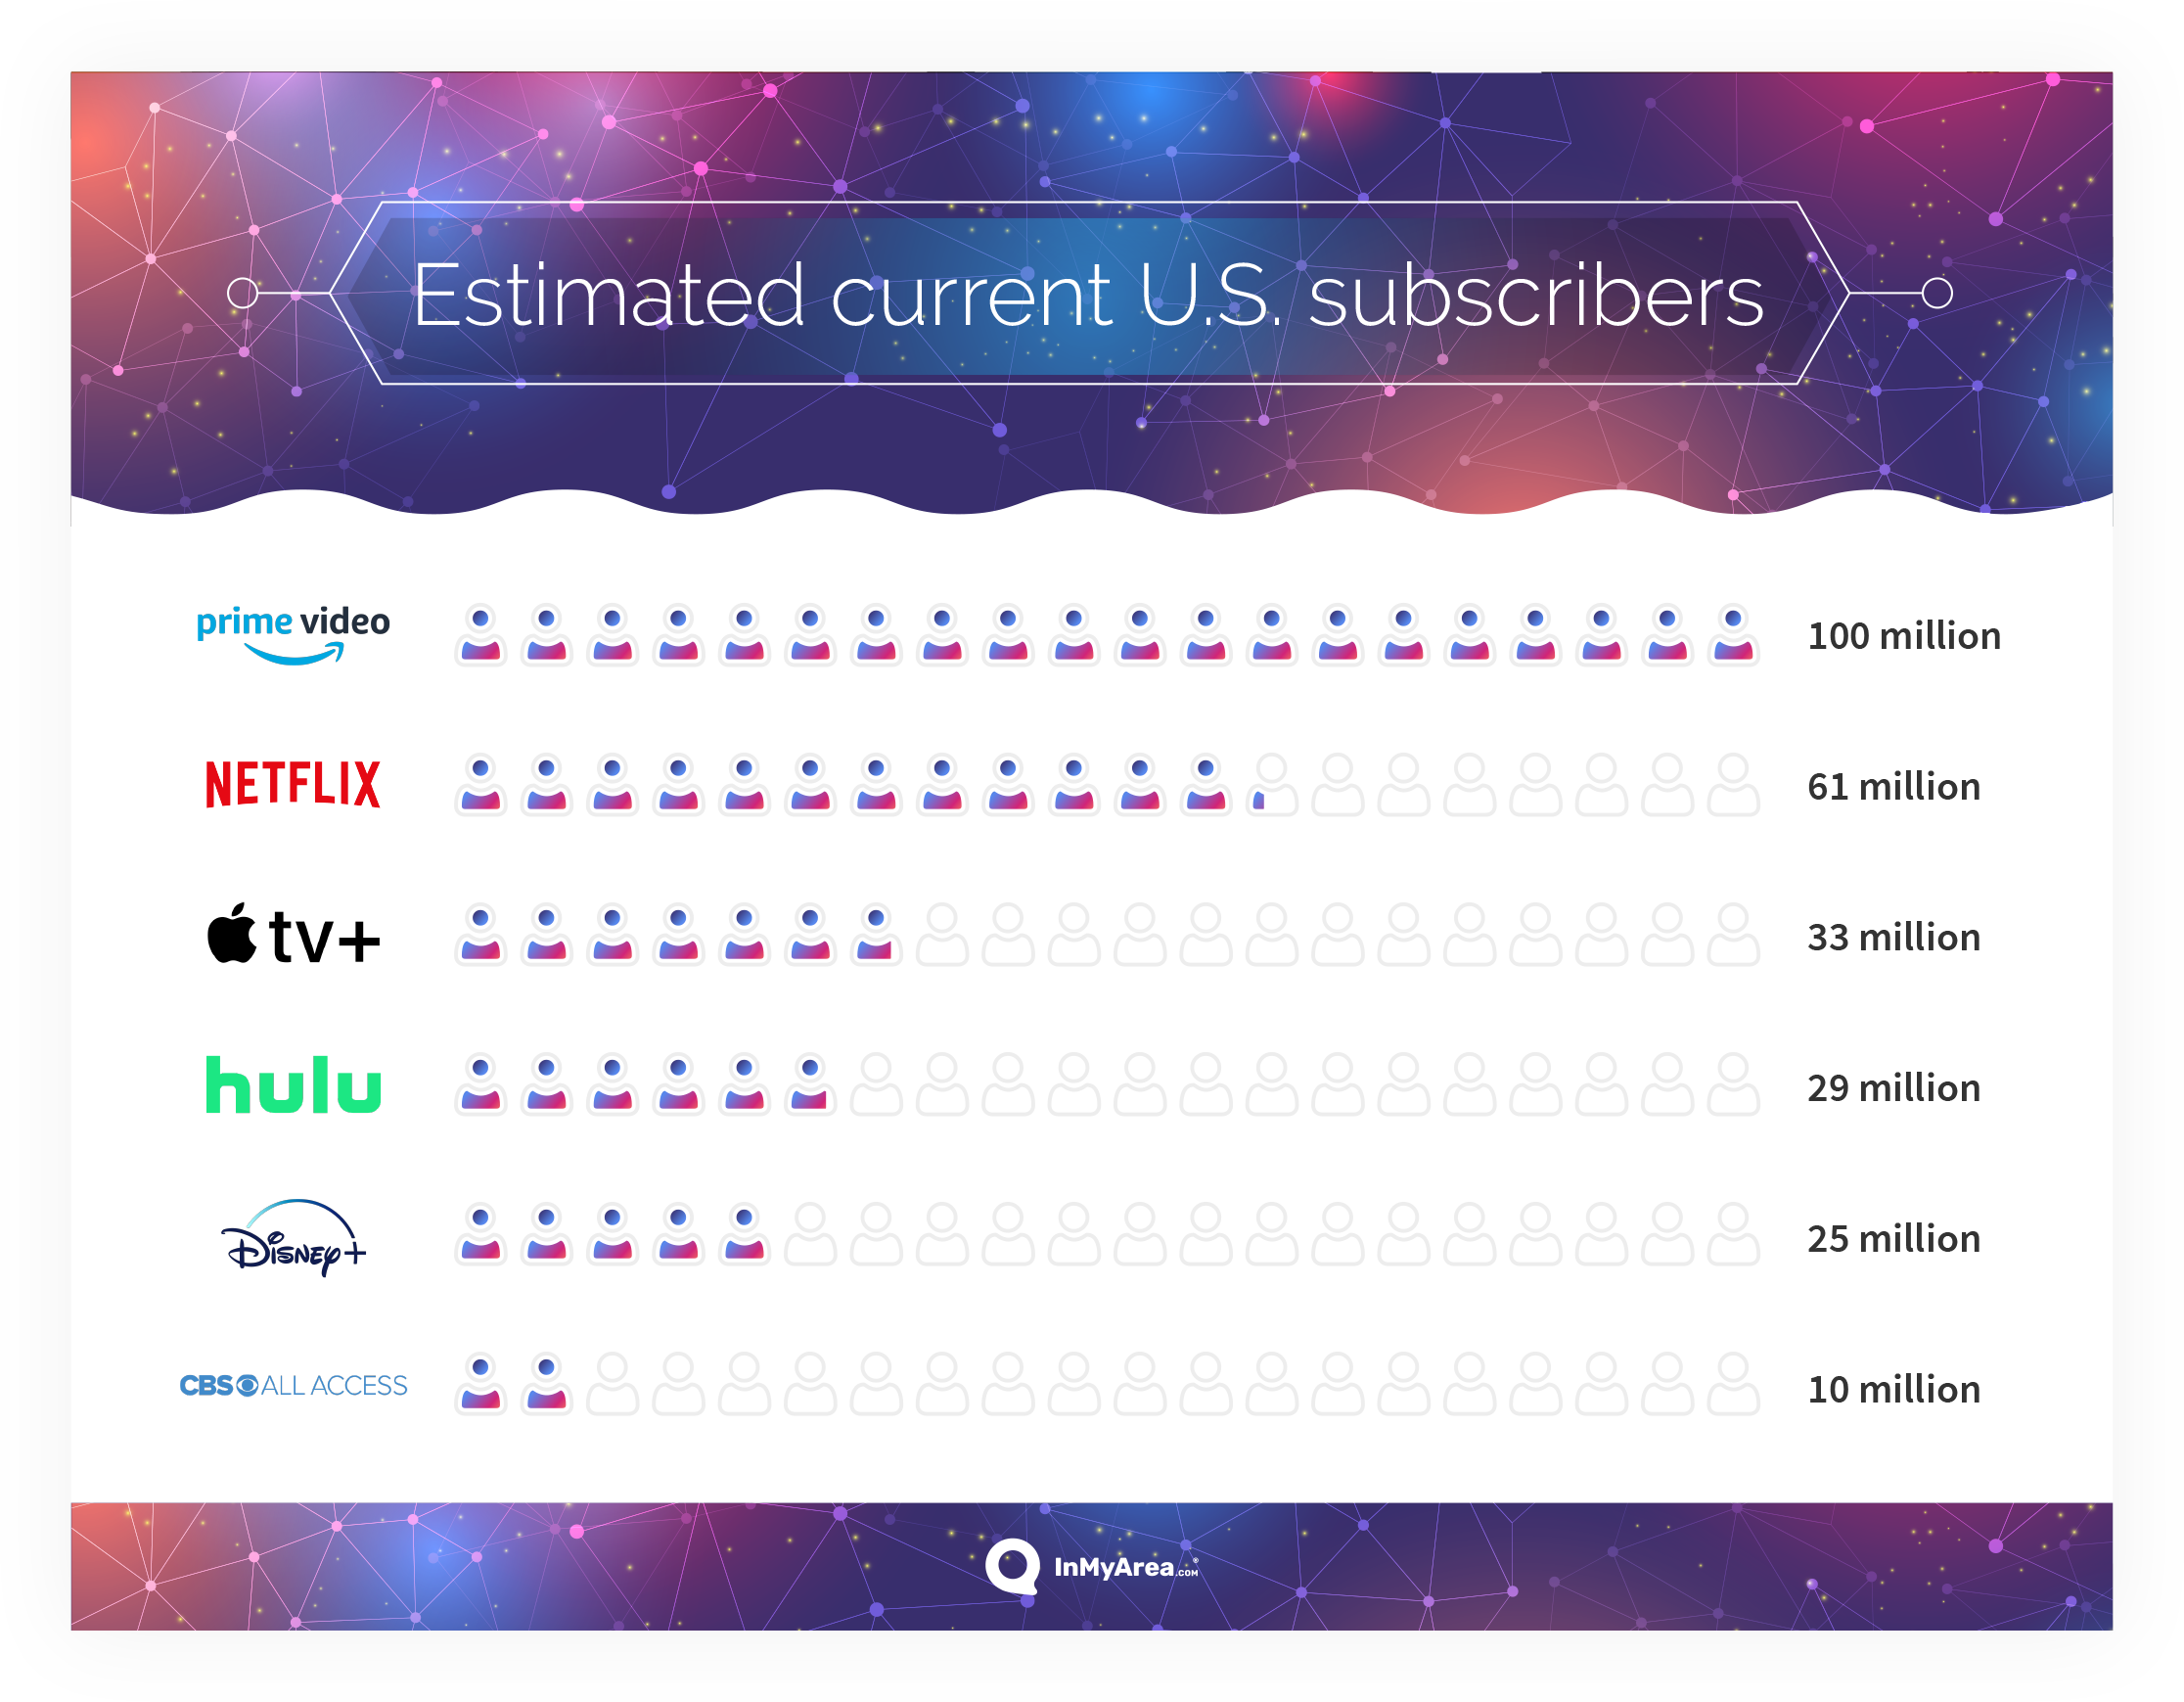 Estimated current U.S. subscribers by streaming platform graph